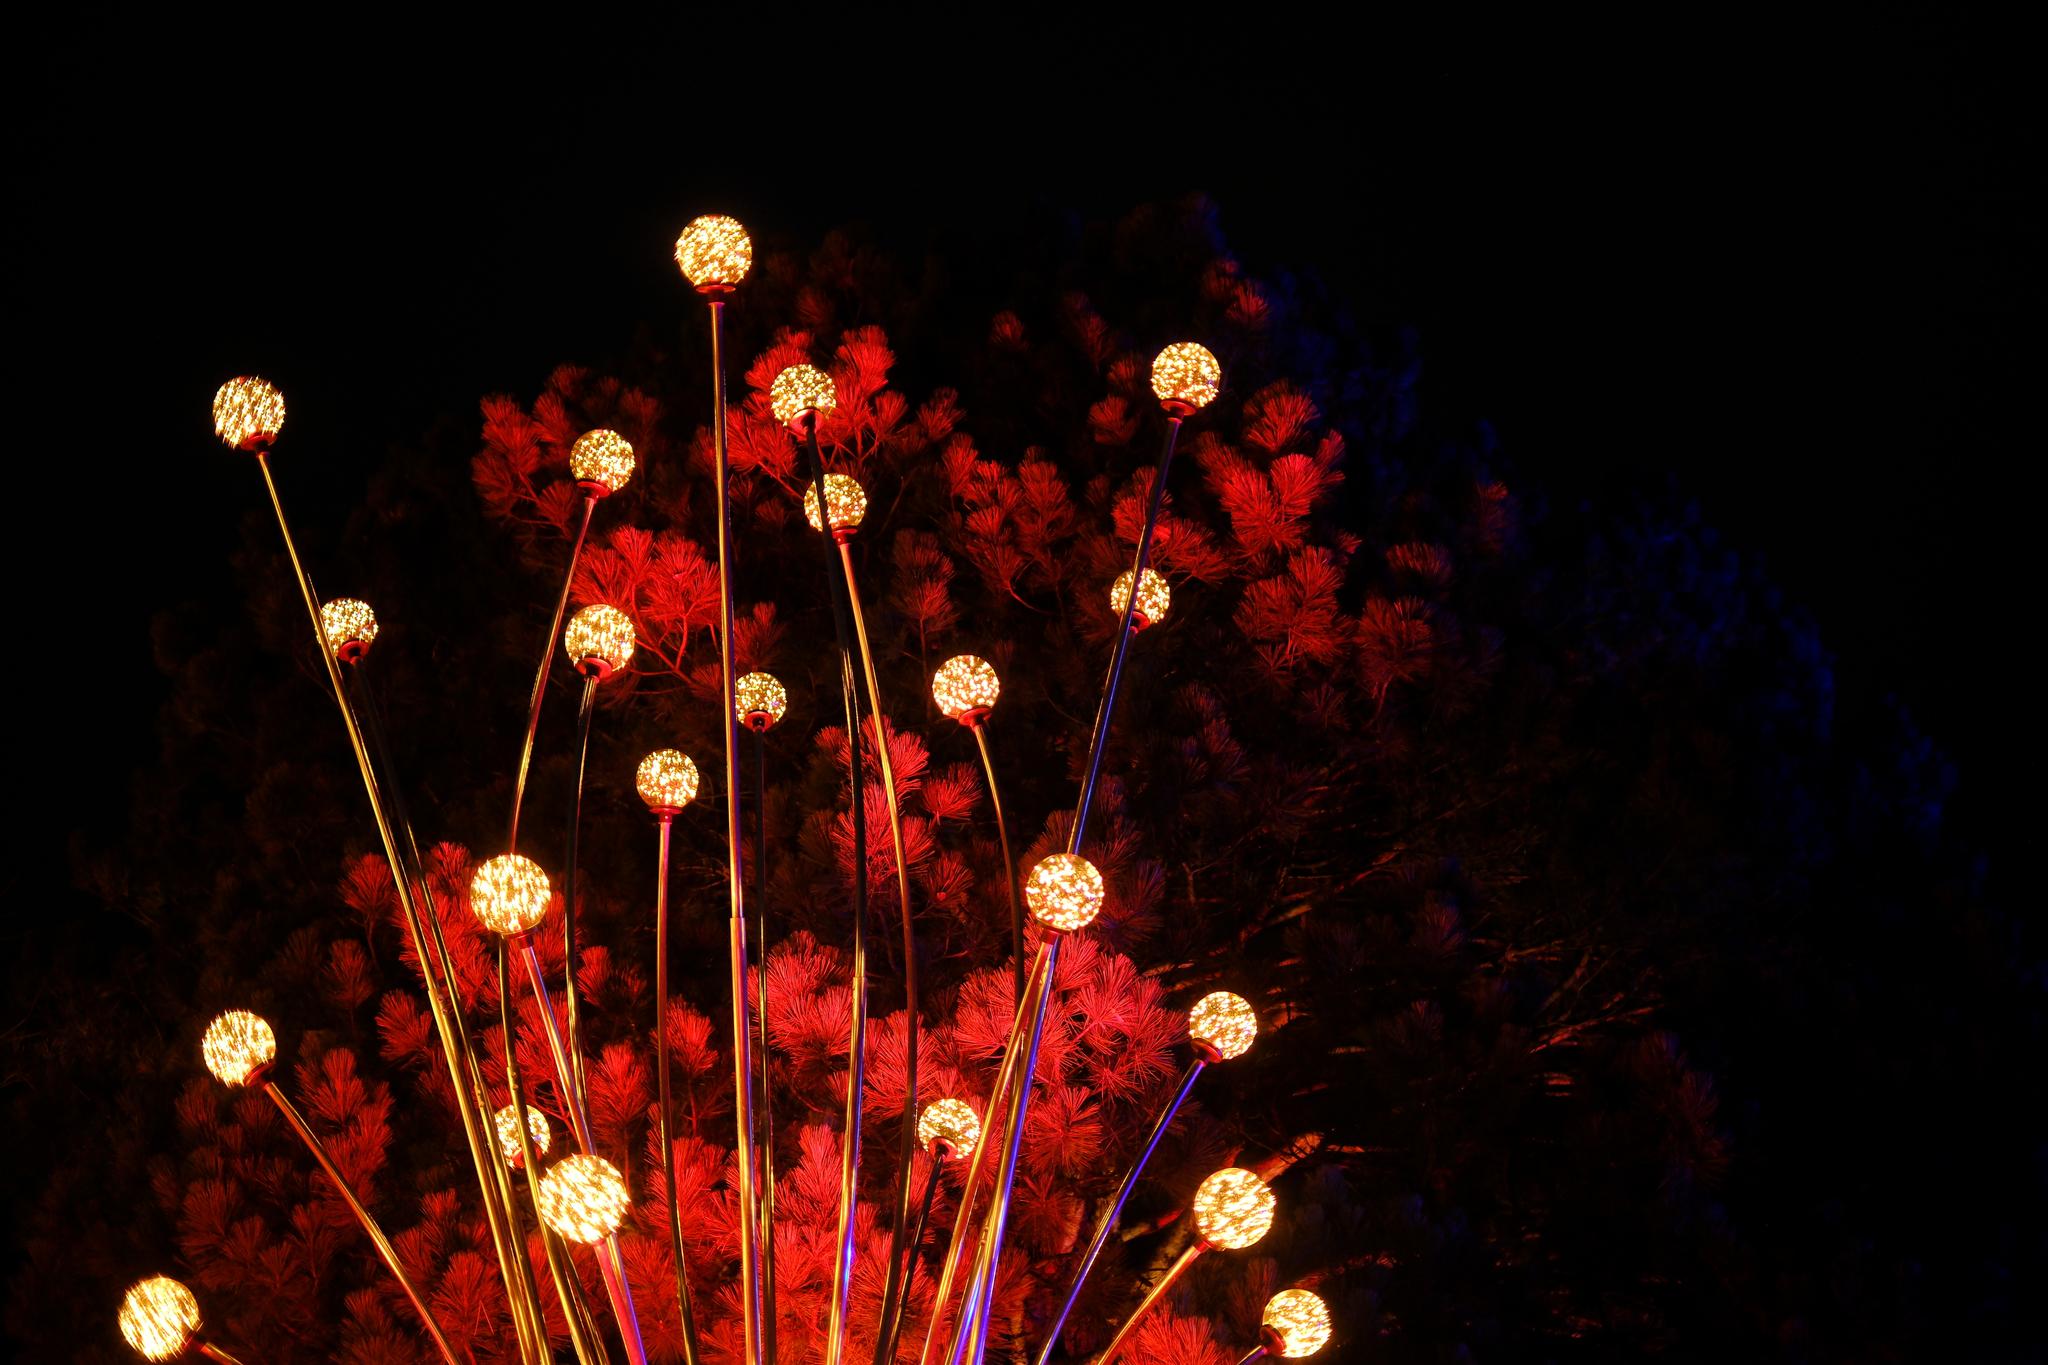 Brightly lit spherical lights on long stems against a dark background, with red and blue hues in the backdrop